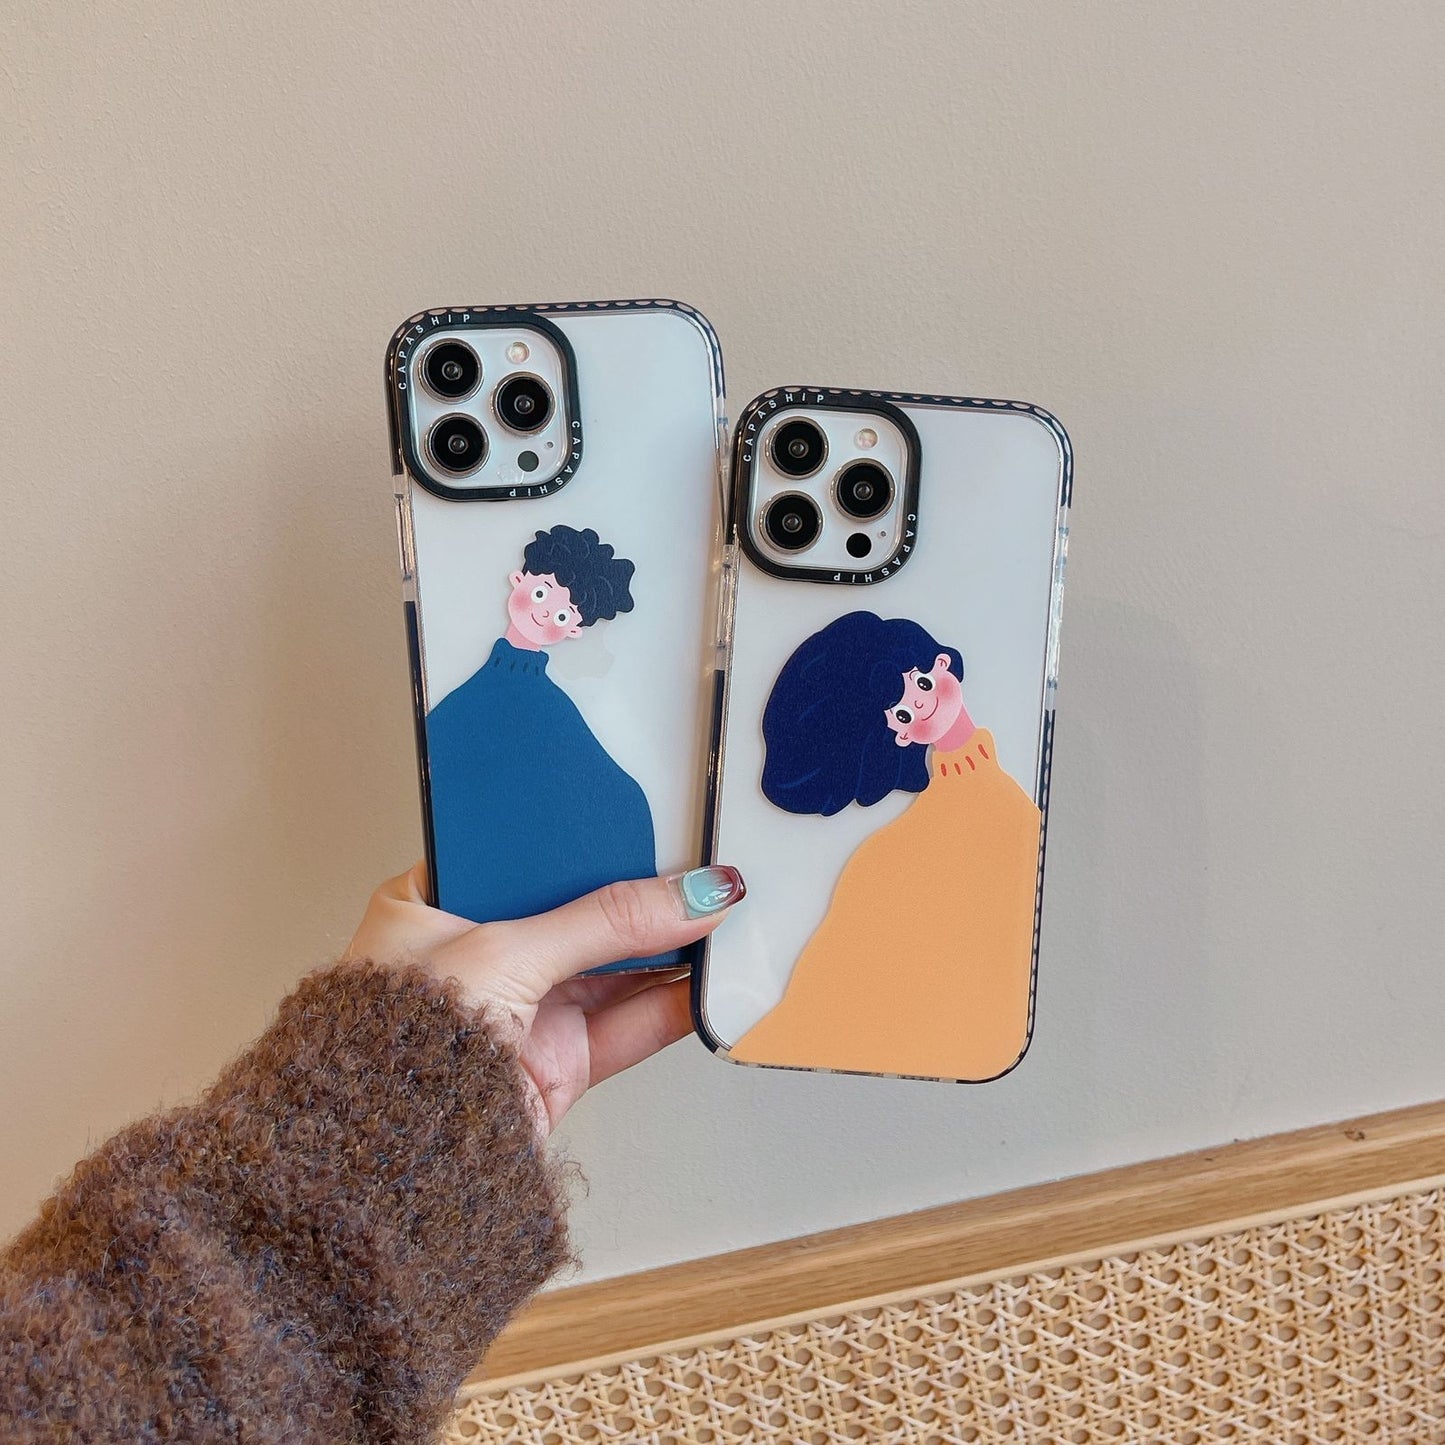 Sweater phone case for iPhone